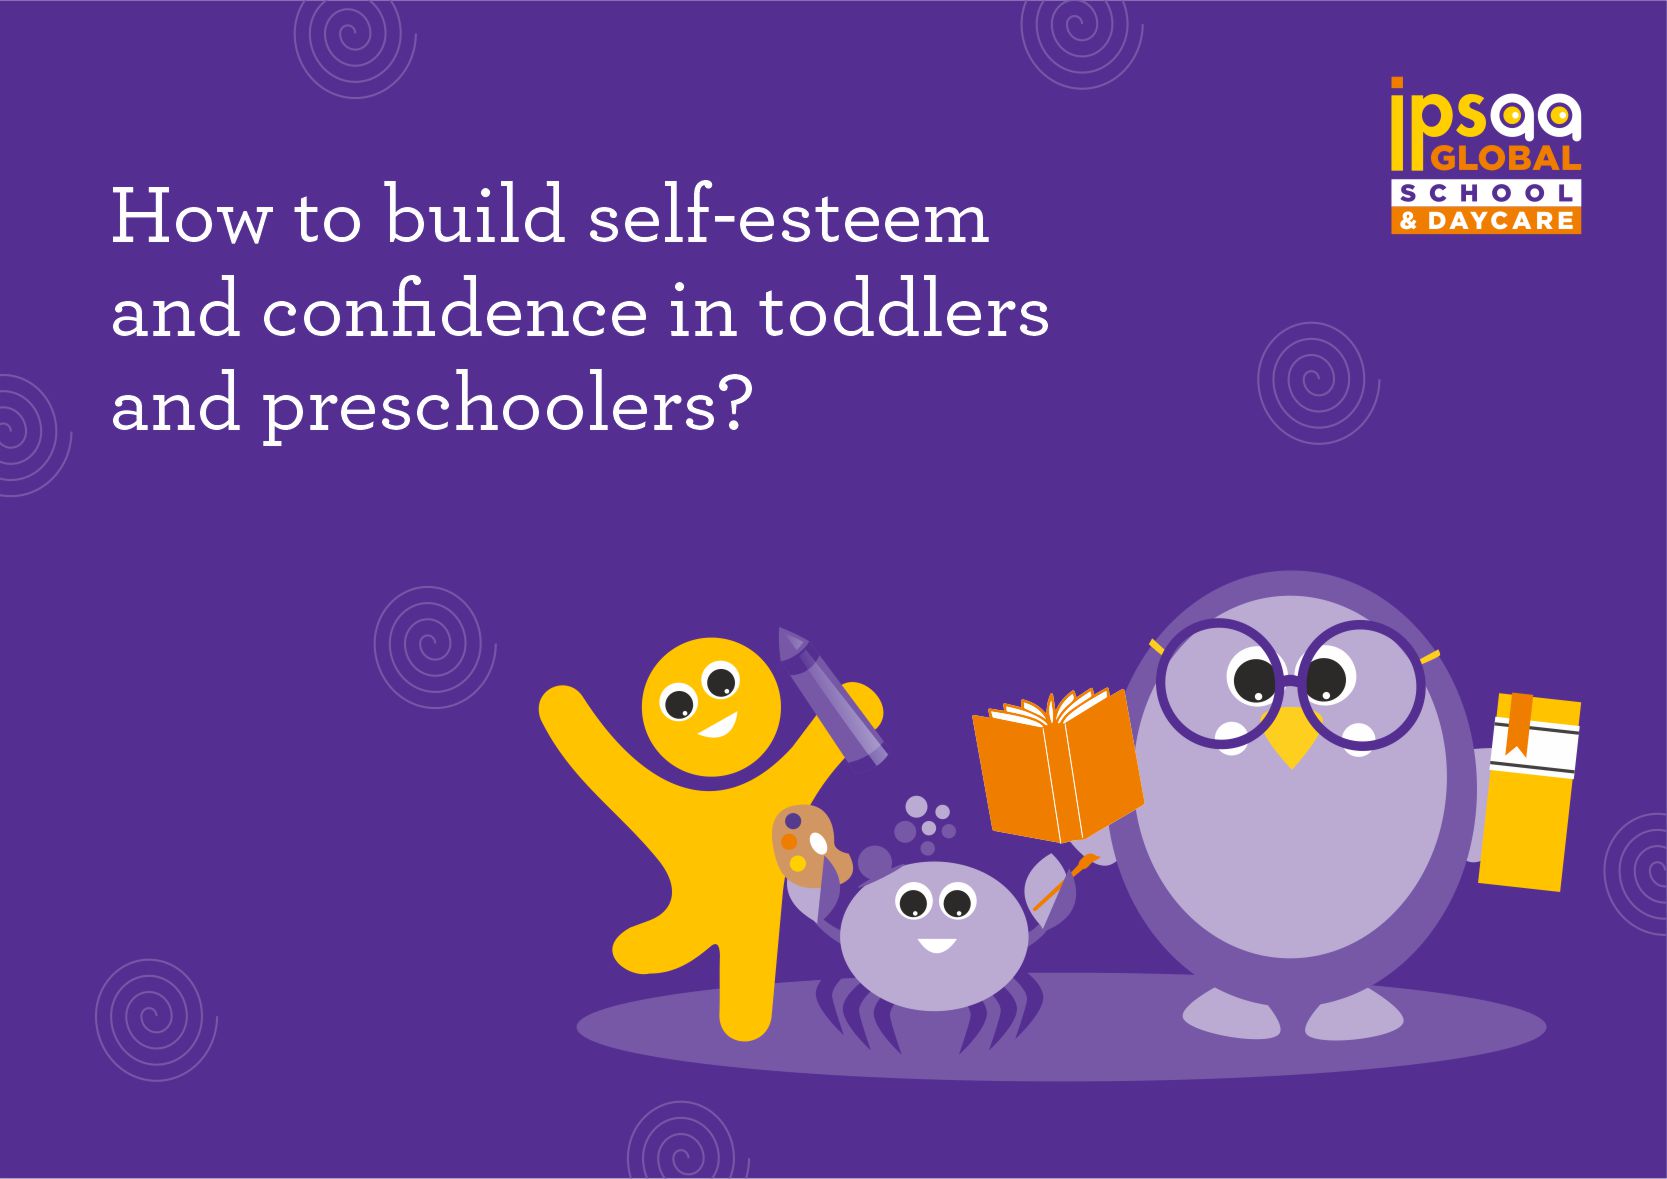 How to build self- esteem and confidence in toddlers and preschoolers?